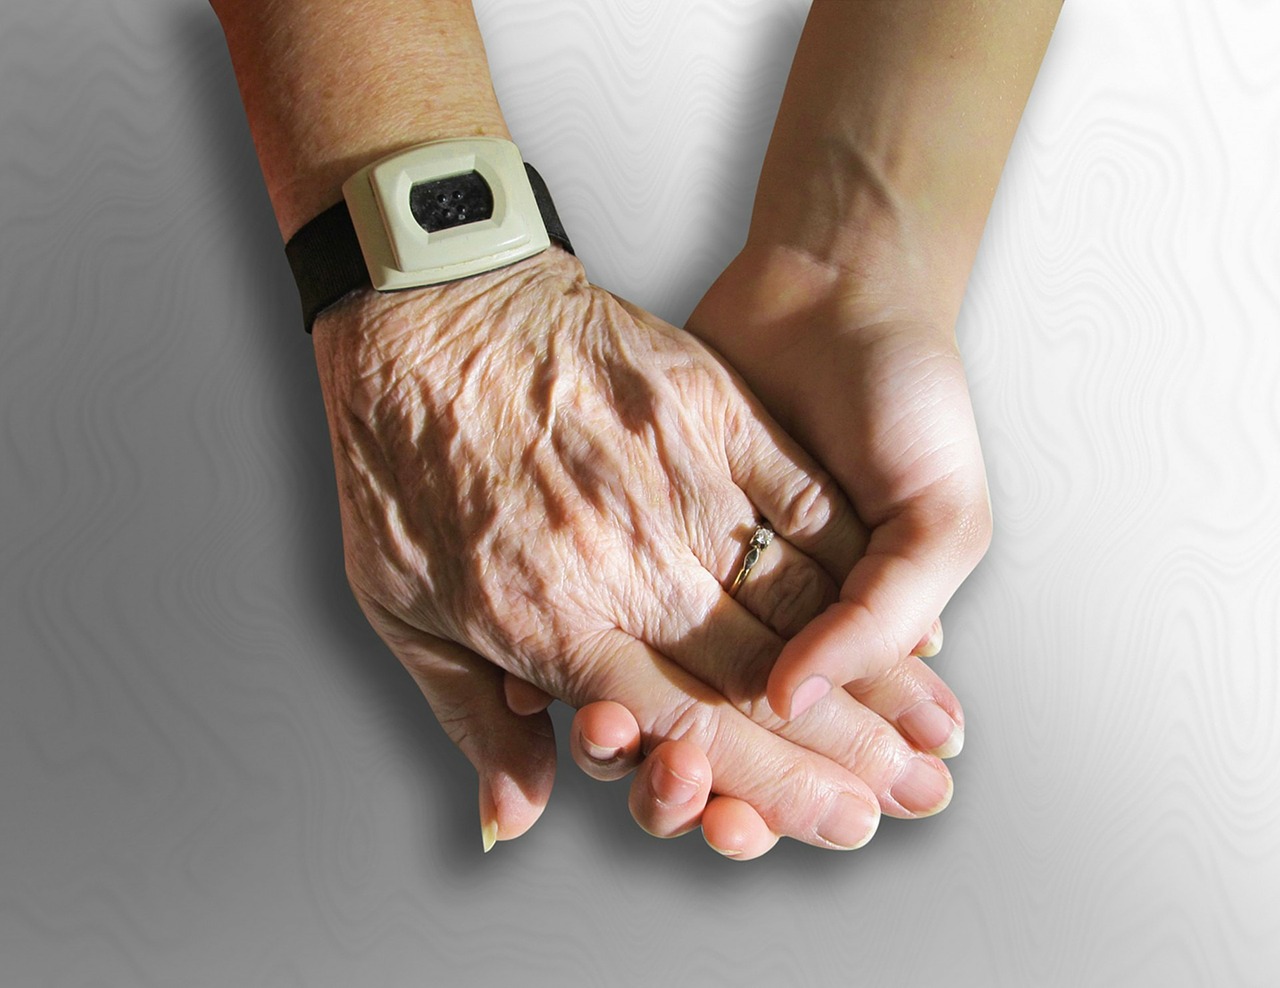 5 Things To Do For Dying Elderly Parents